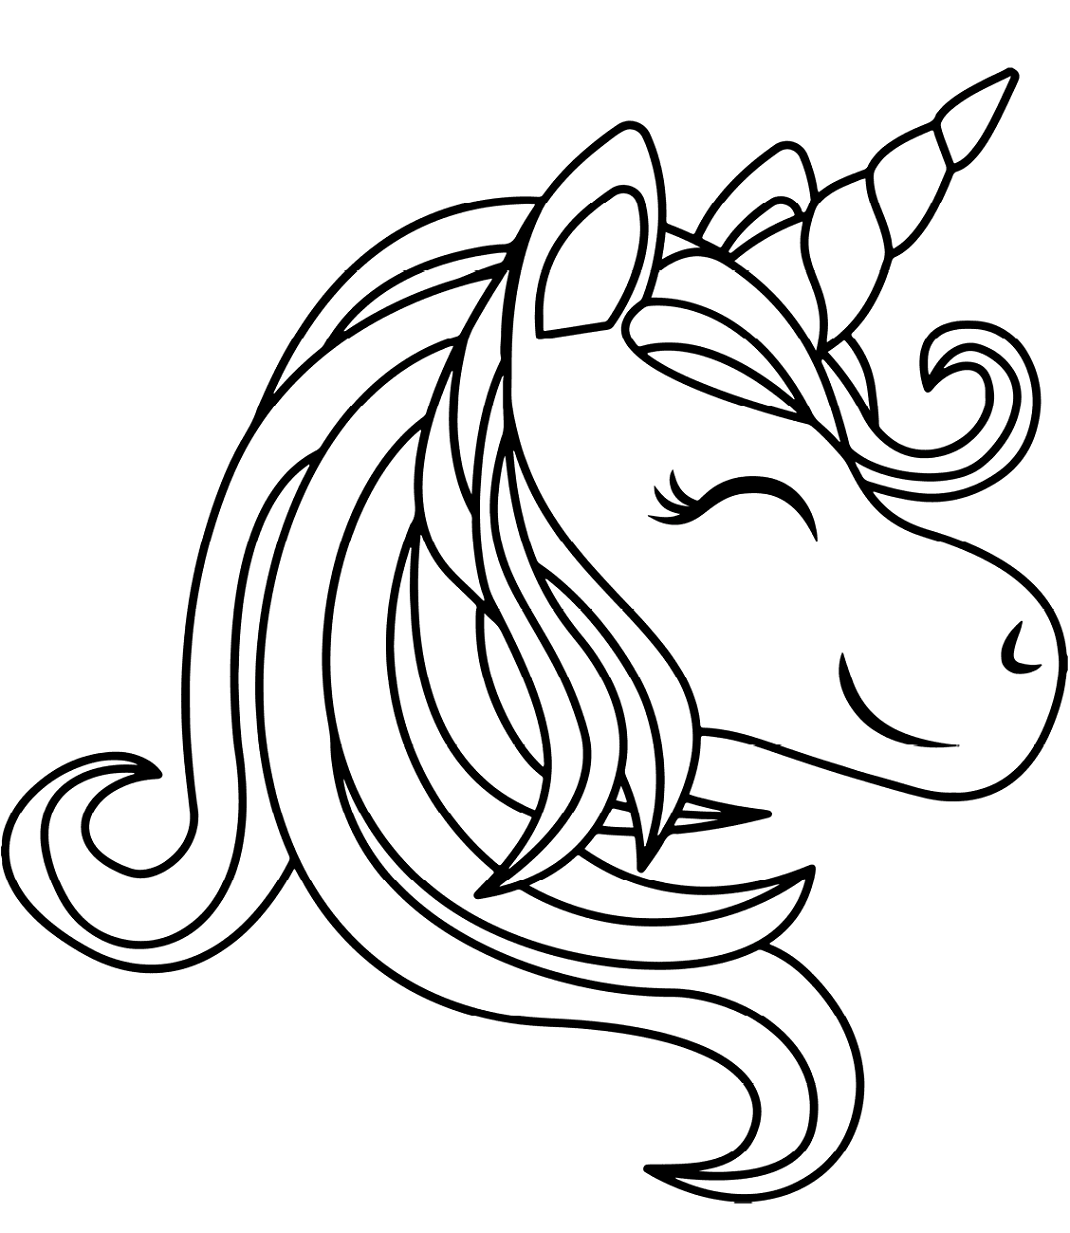 Unicorn Head Smiling Coloring Page - Free Printable Coloring Pages for Kids